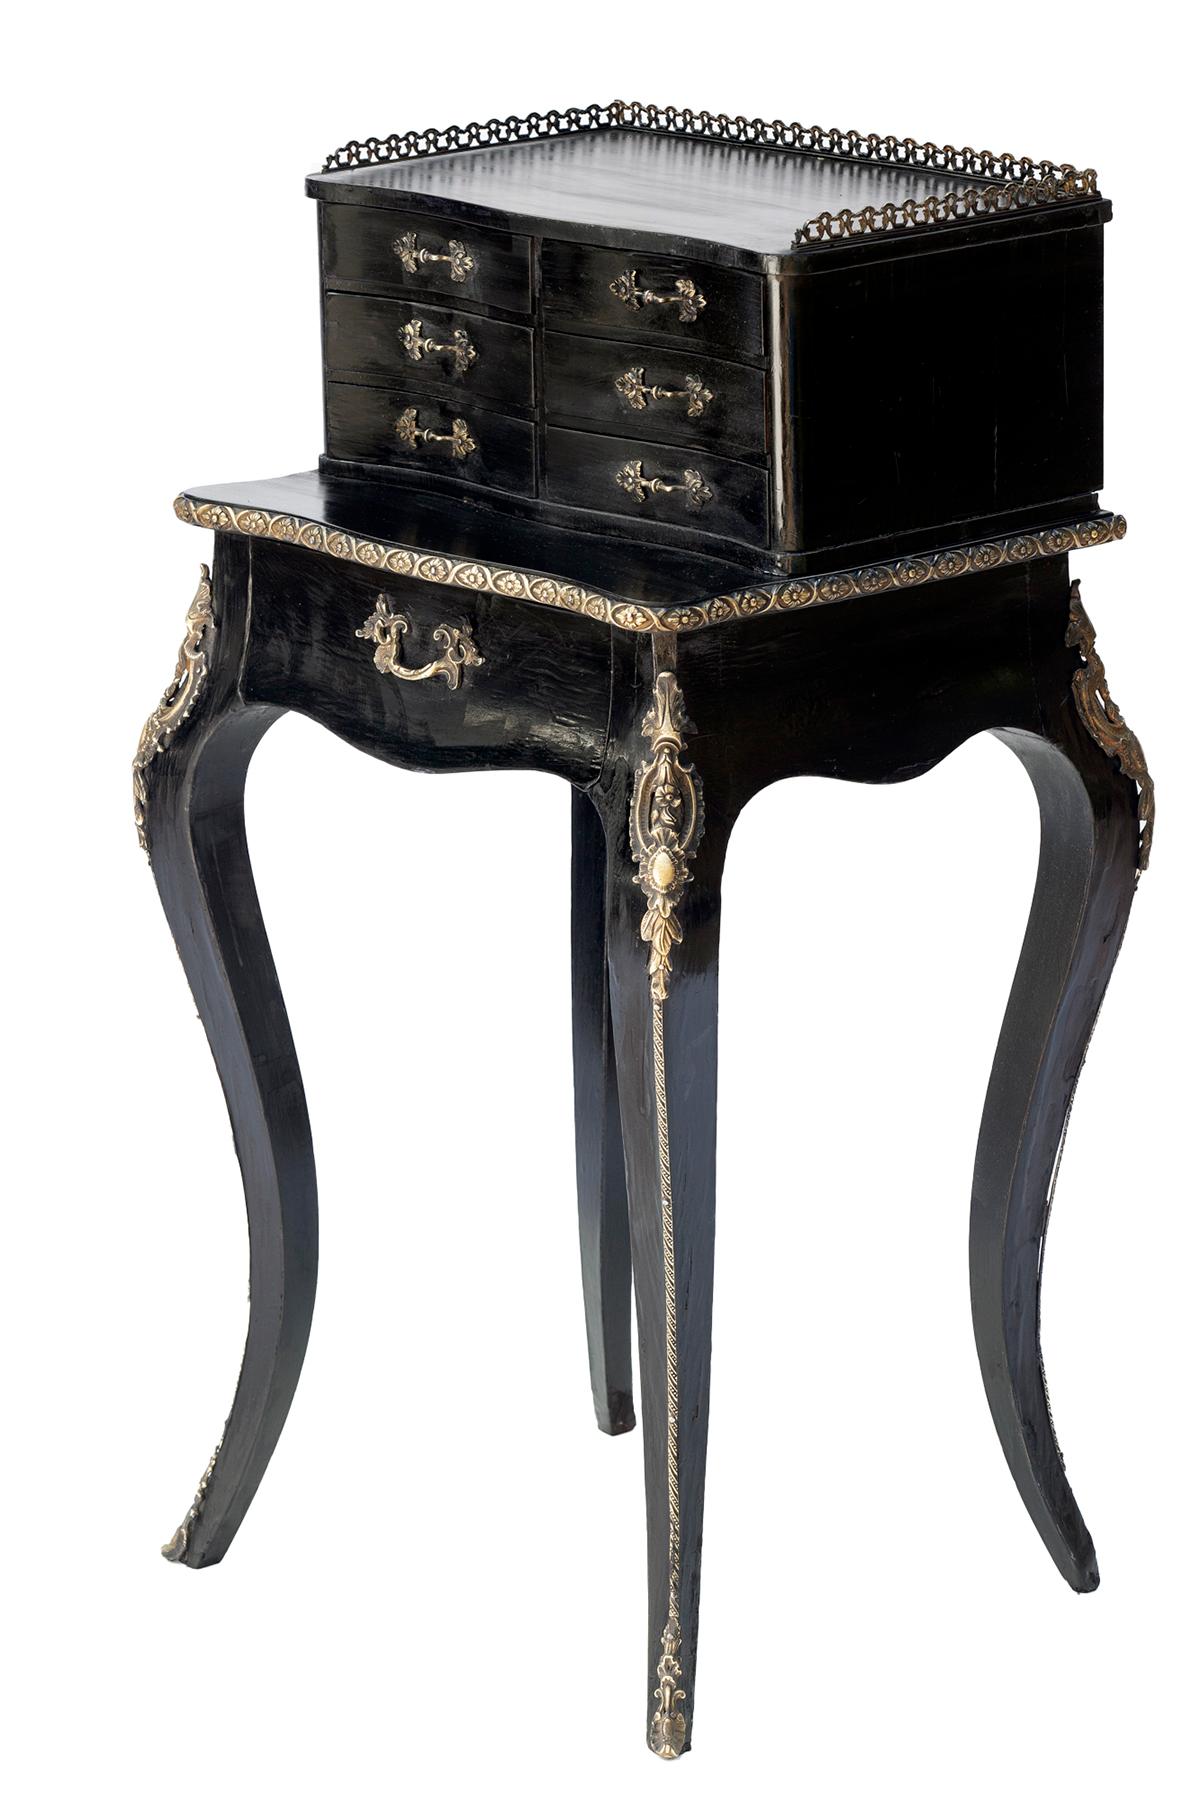 Ebonized Napolean III period Mahogany petite dressing table for jewels & other small valuables. Six small drawers with decorative pulls and lined drawers rests on a small table top below which there is a spacious lined drawer.

Bronze gallery on top